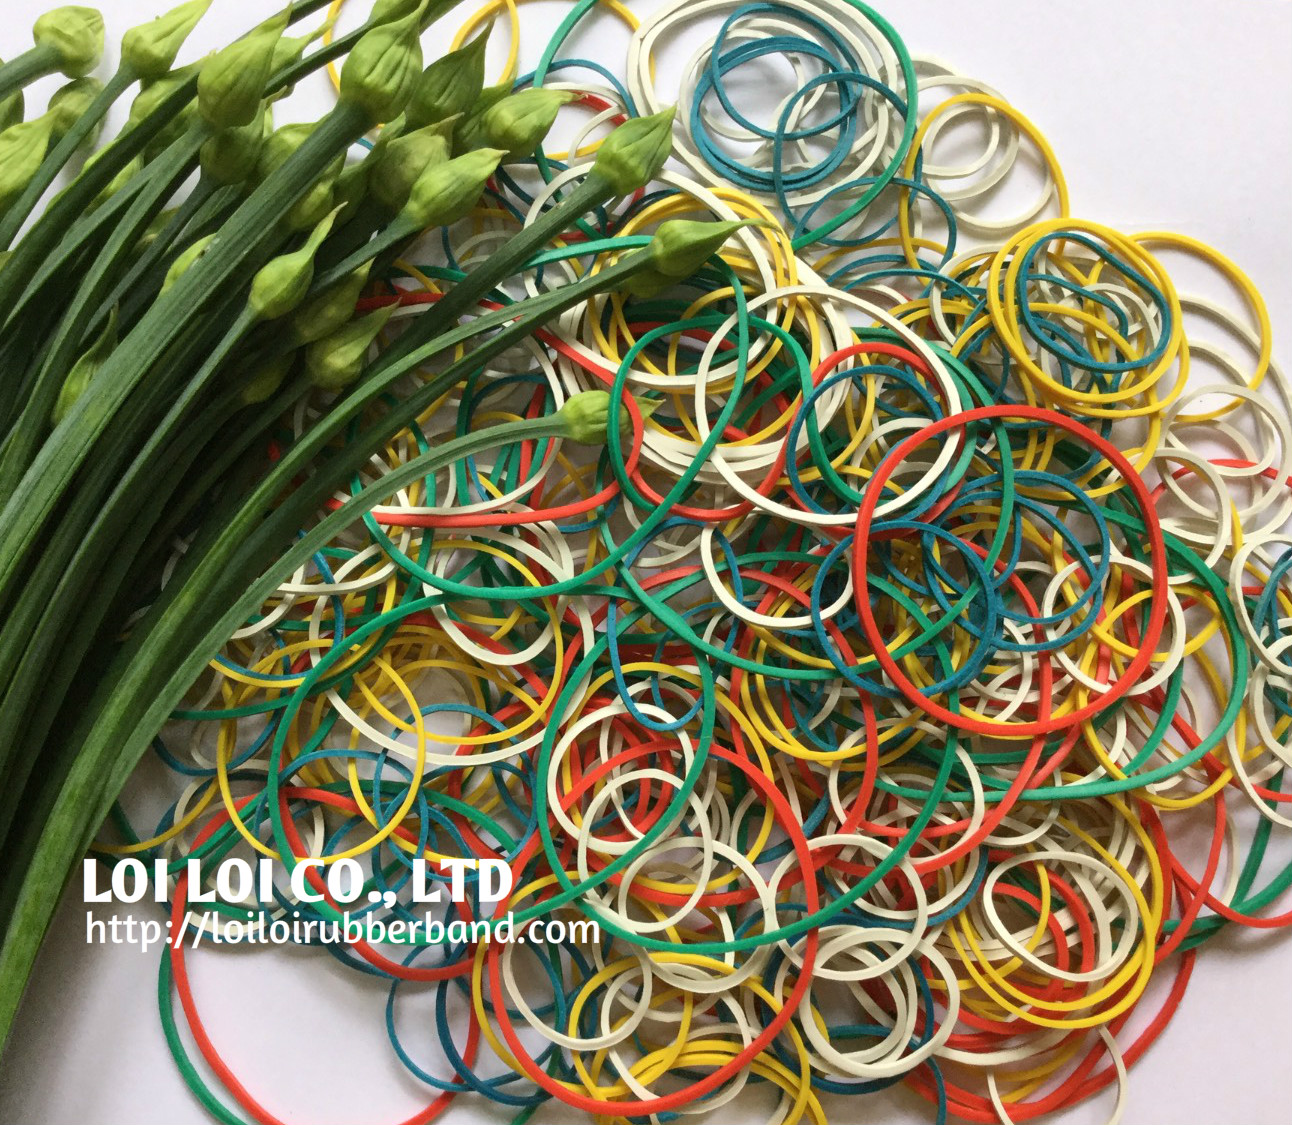 Rubber bands Needed for Agriculture Purpose tie Asparagus, Green Onion, vegetables... high quality and safety for Food grade 